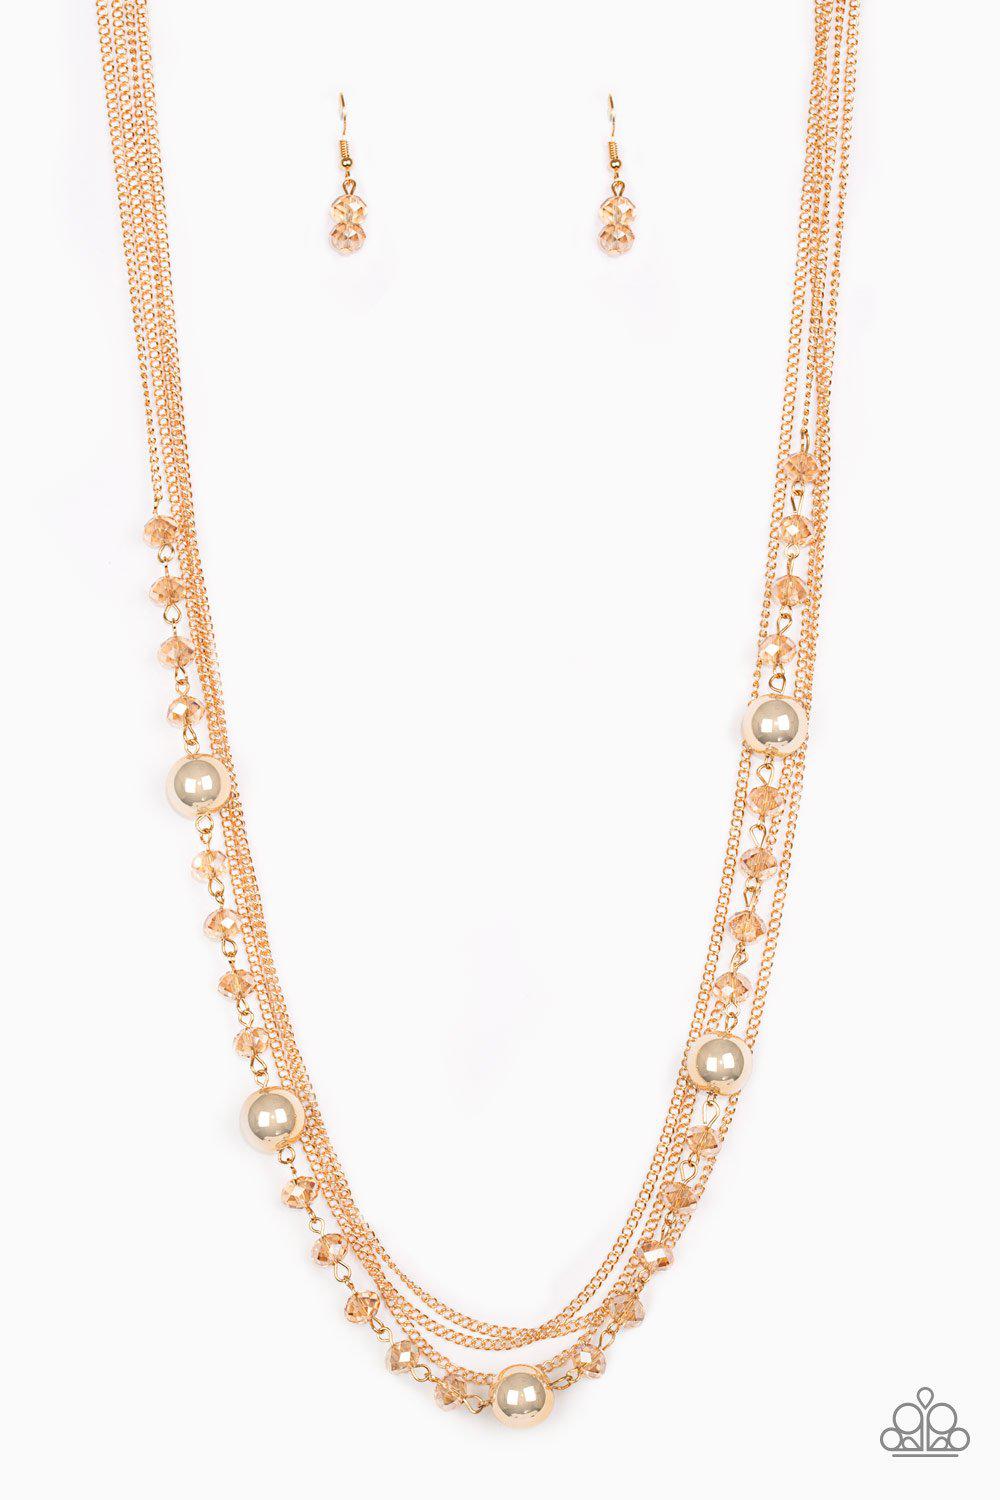 High Standards Gold Necklace - Paparazzi Accessories-CarasShop.com - $5 Jewelry by Cara Jewels